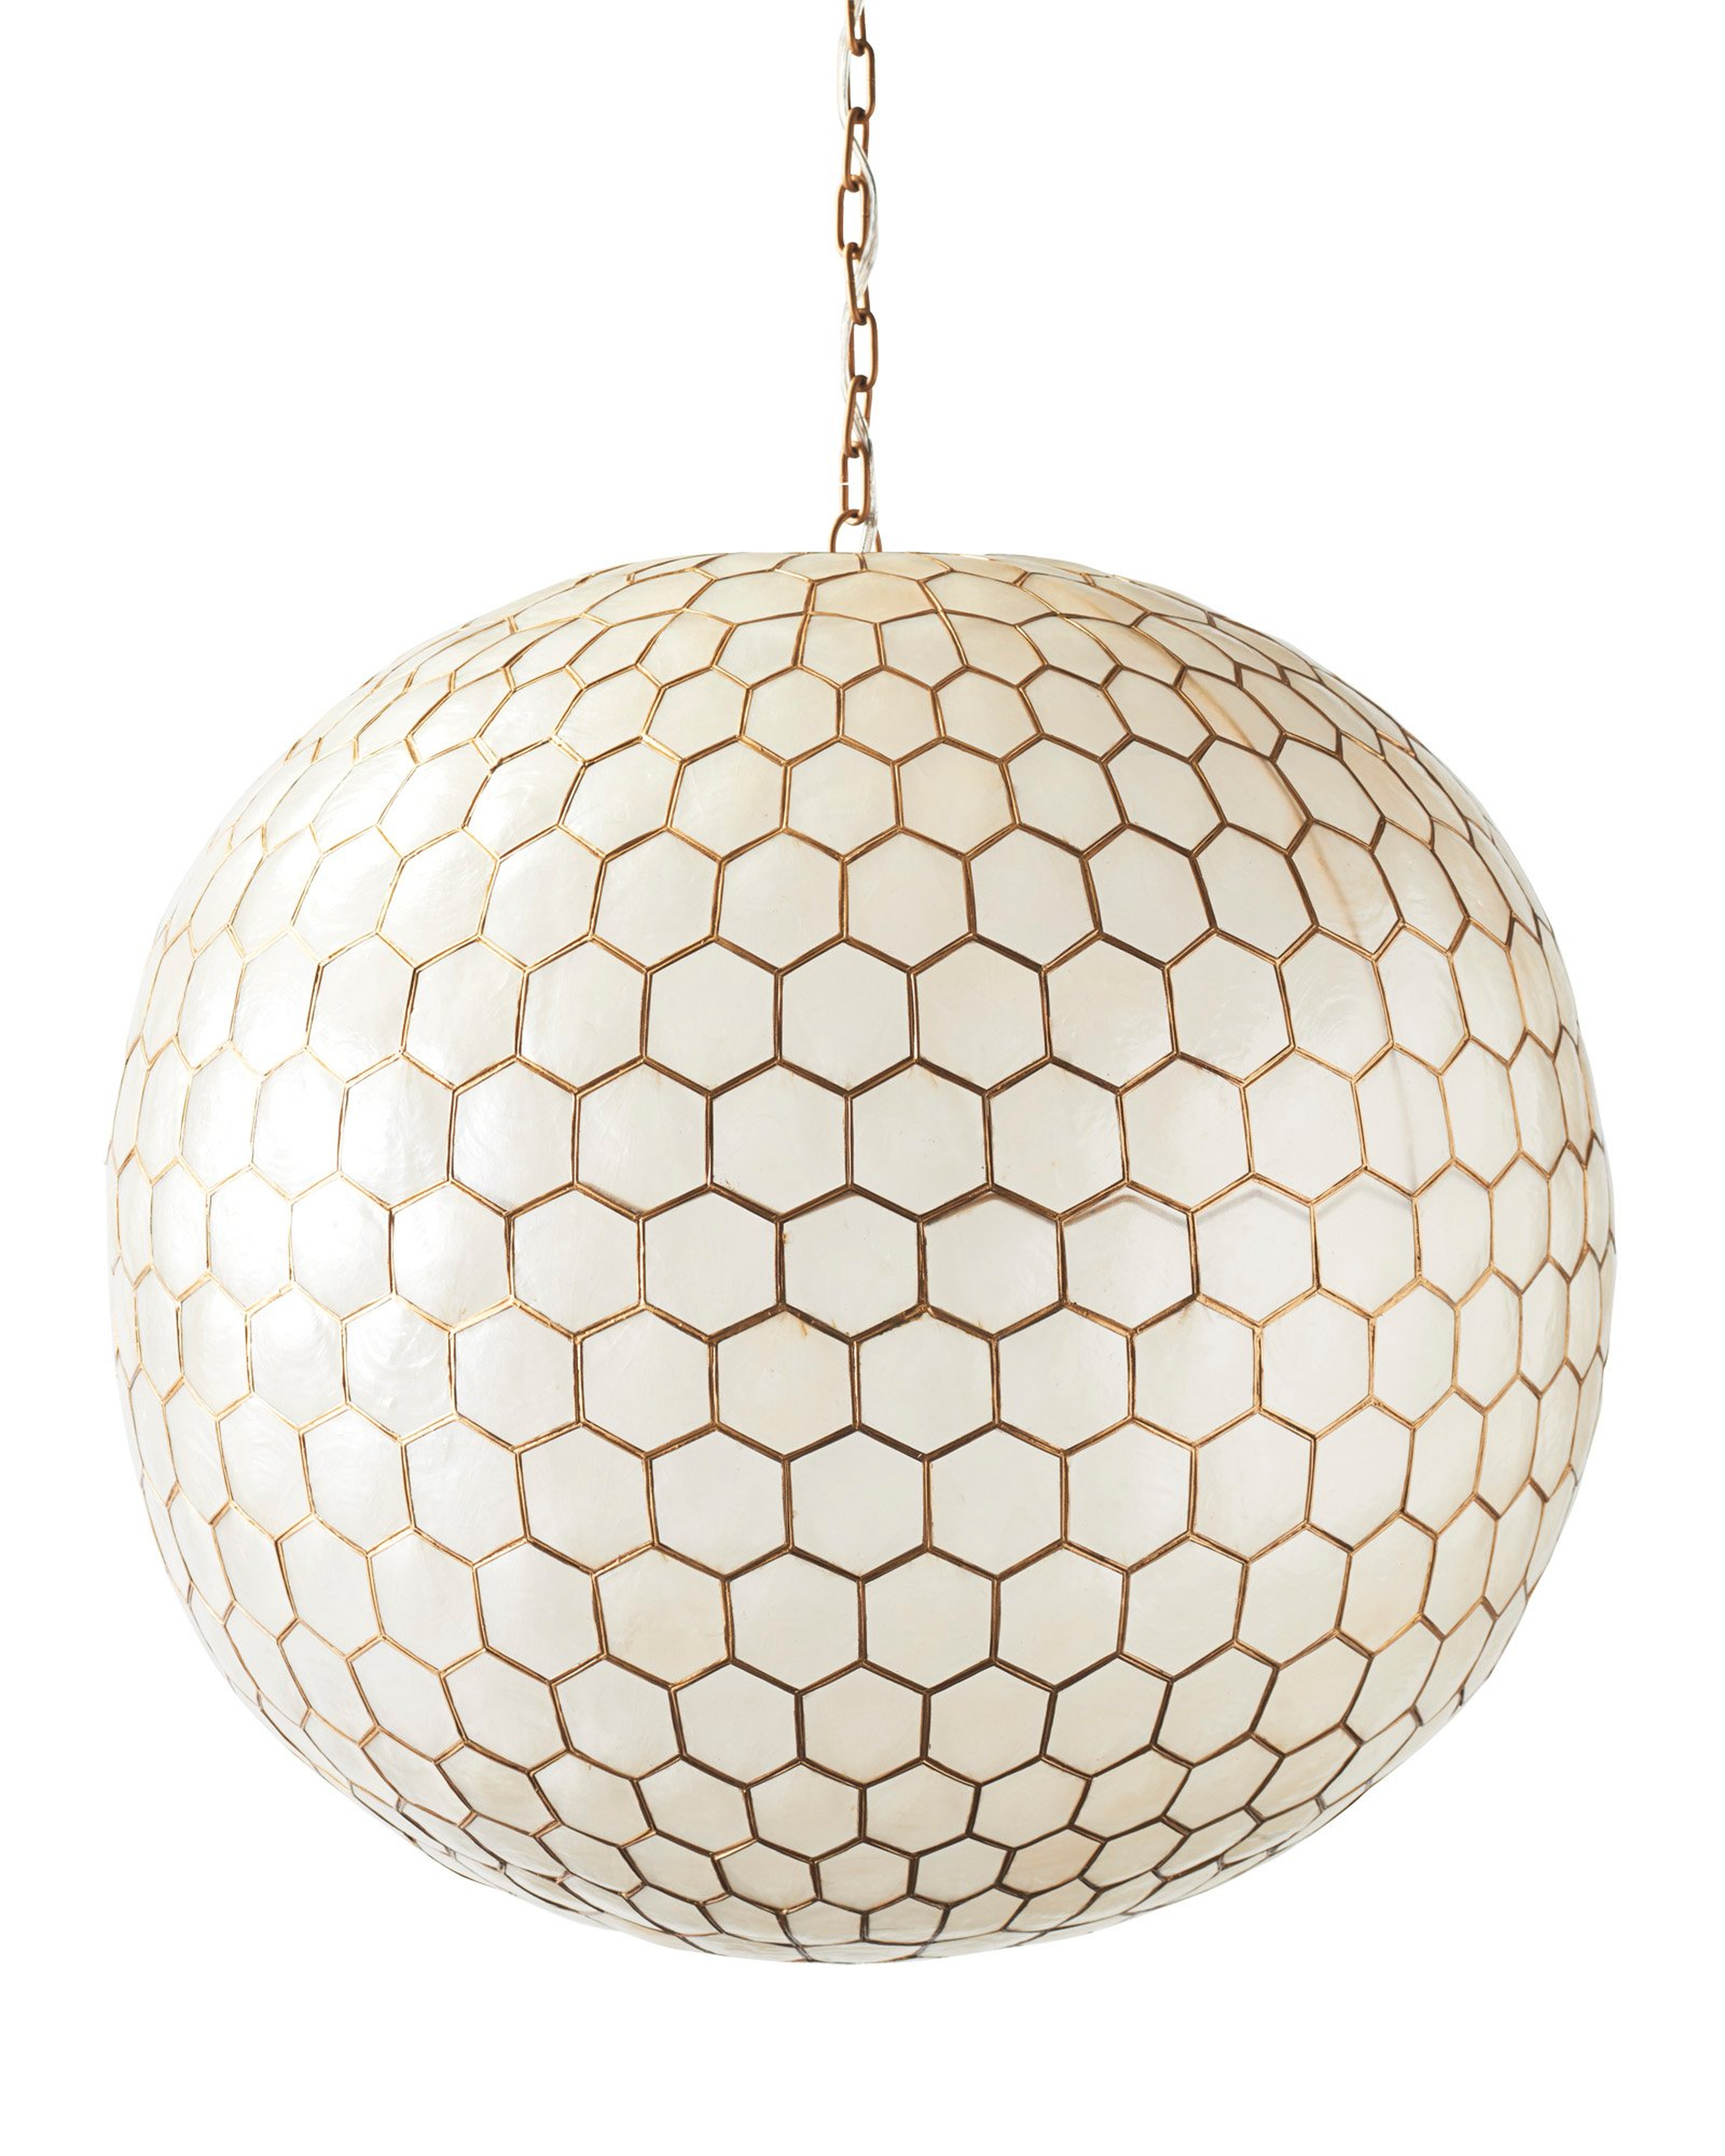 Capiz Honeycomb Chandelier - Large - Serena and Lily